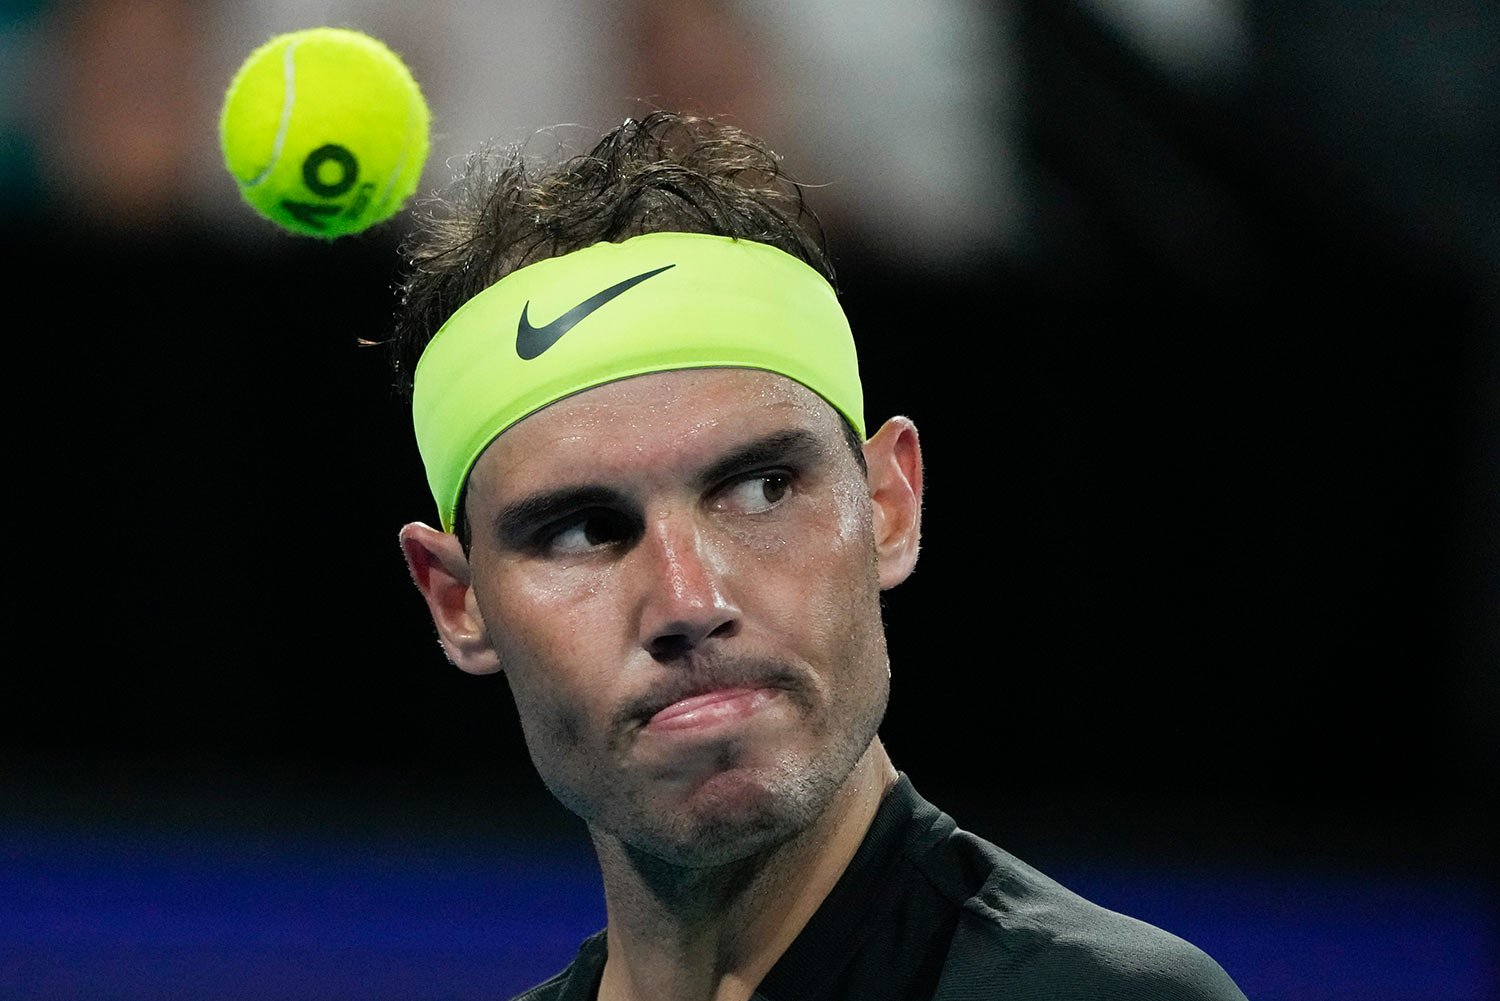  Spain's Rafael Nadal reacts after losing a game to Australia's Alex de Minaur during their Group D match at the United Cup tennis event in Sydney, Australia, Monday, Jan. 2, 2023. (AP Photo/Mark Baker) 